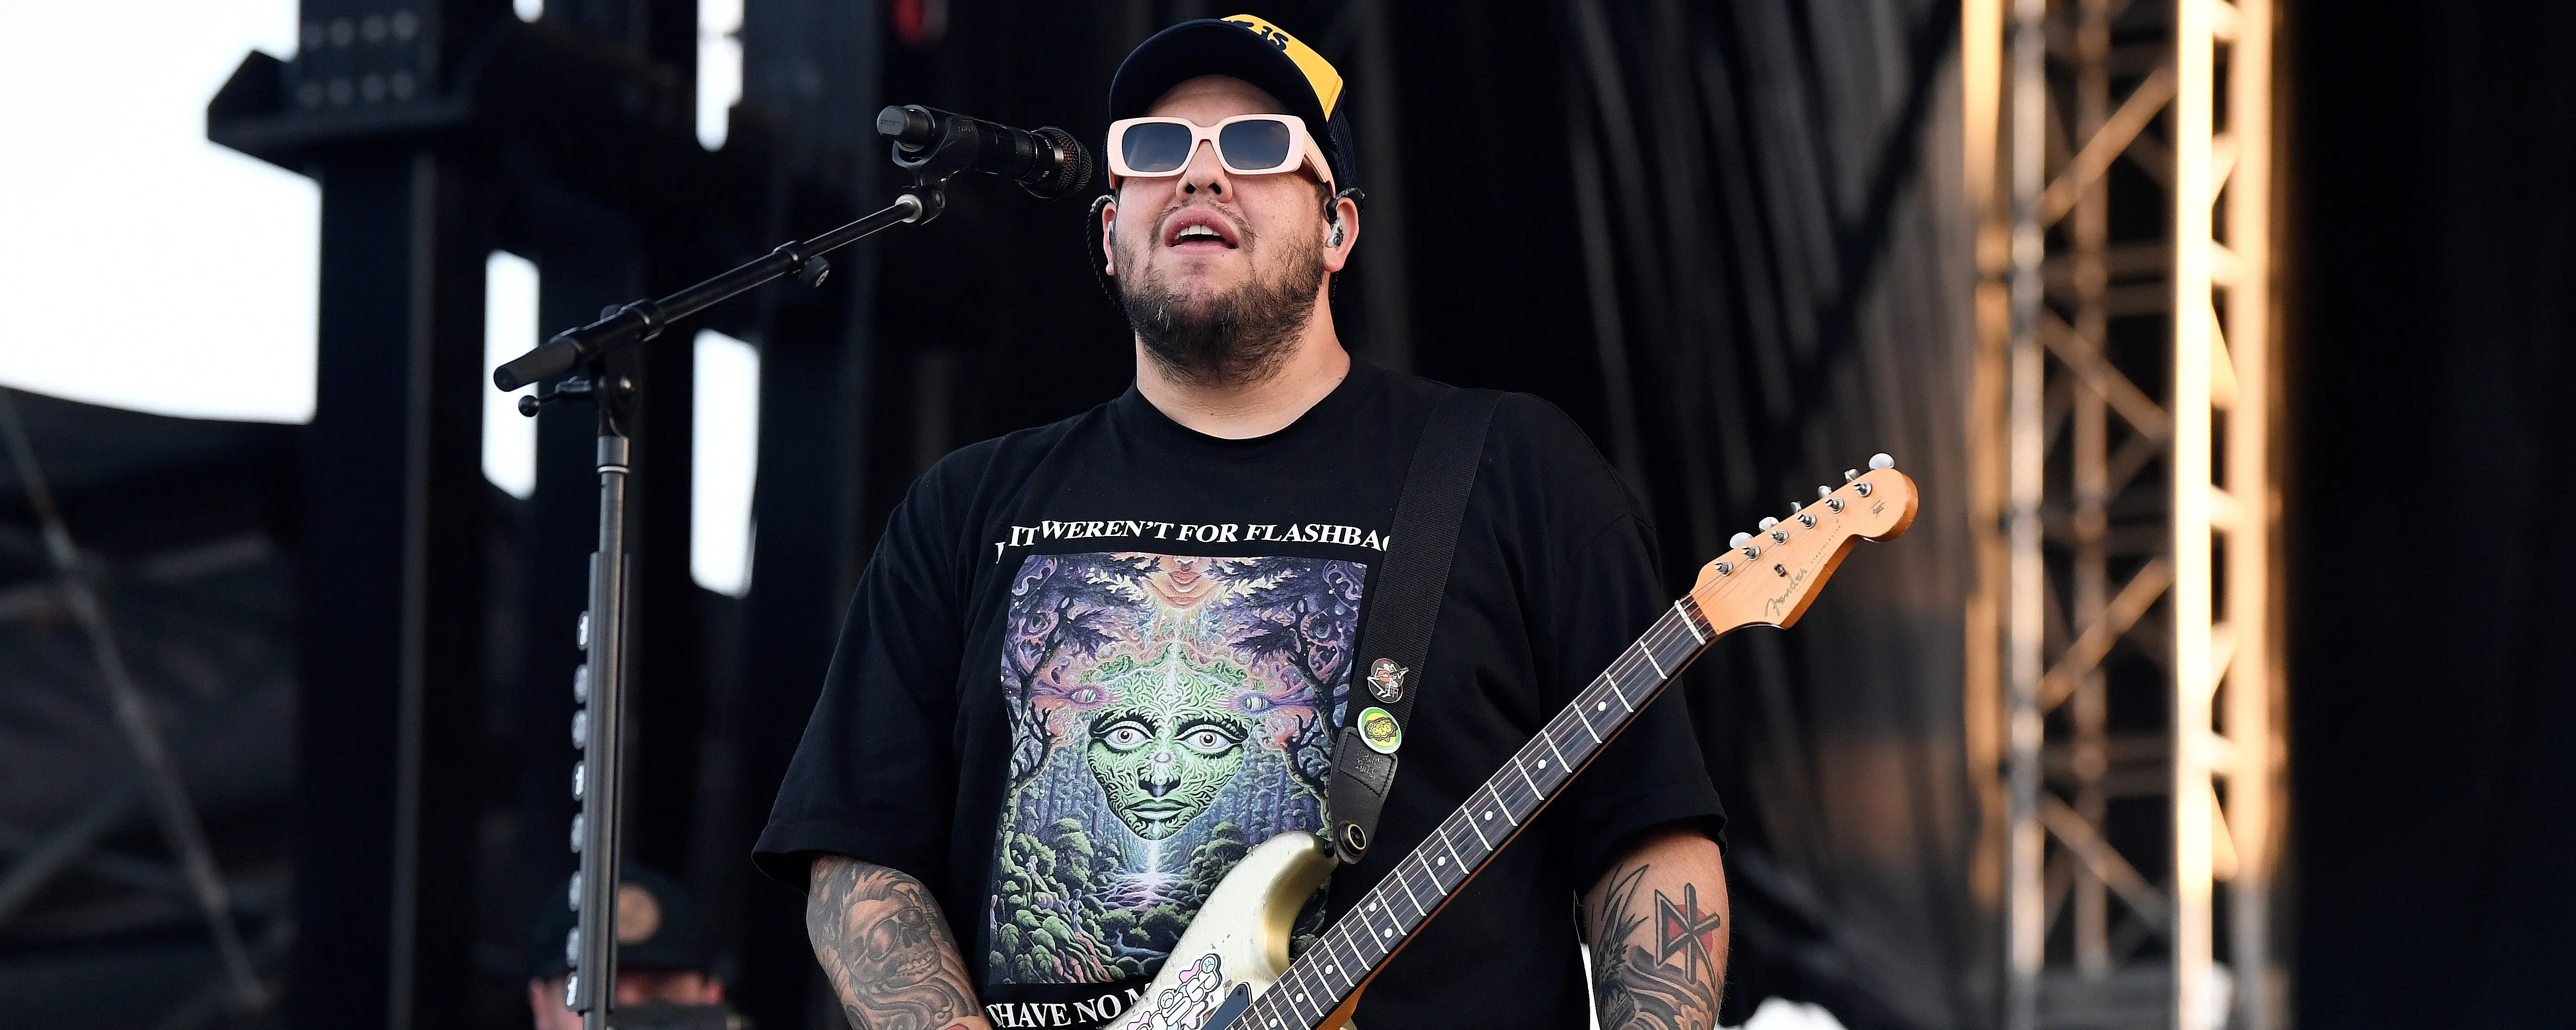 Rome Ramirez Announces His Departure From Sublime With Rome, Bradley Nowell’s Son to Head New Era